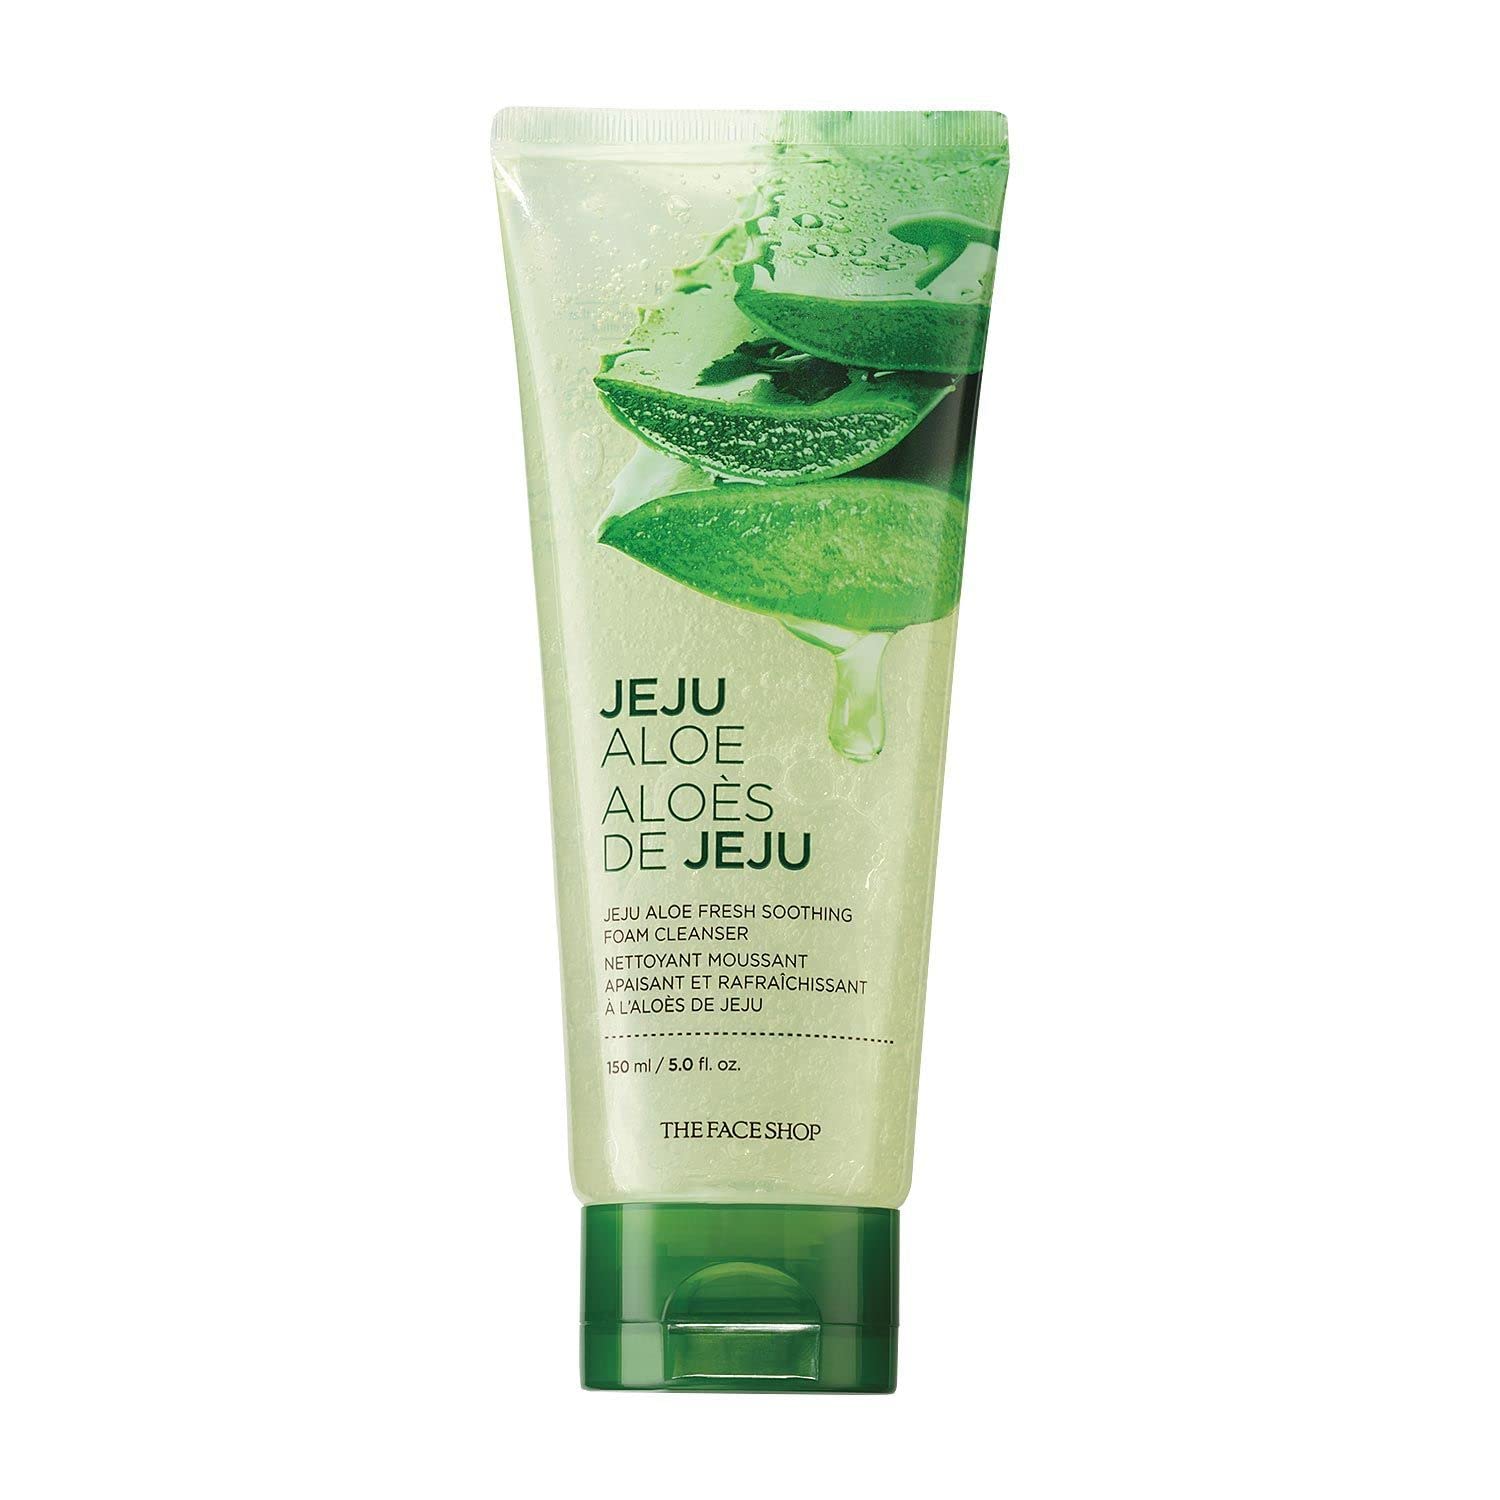 The Face Shop Jeju Aloe Fresh Soothing Foam Cleanser | Gel to Foam cleanser for Skin,Body and Face | Hydrating & cooling cleanser, 150ml